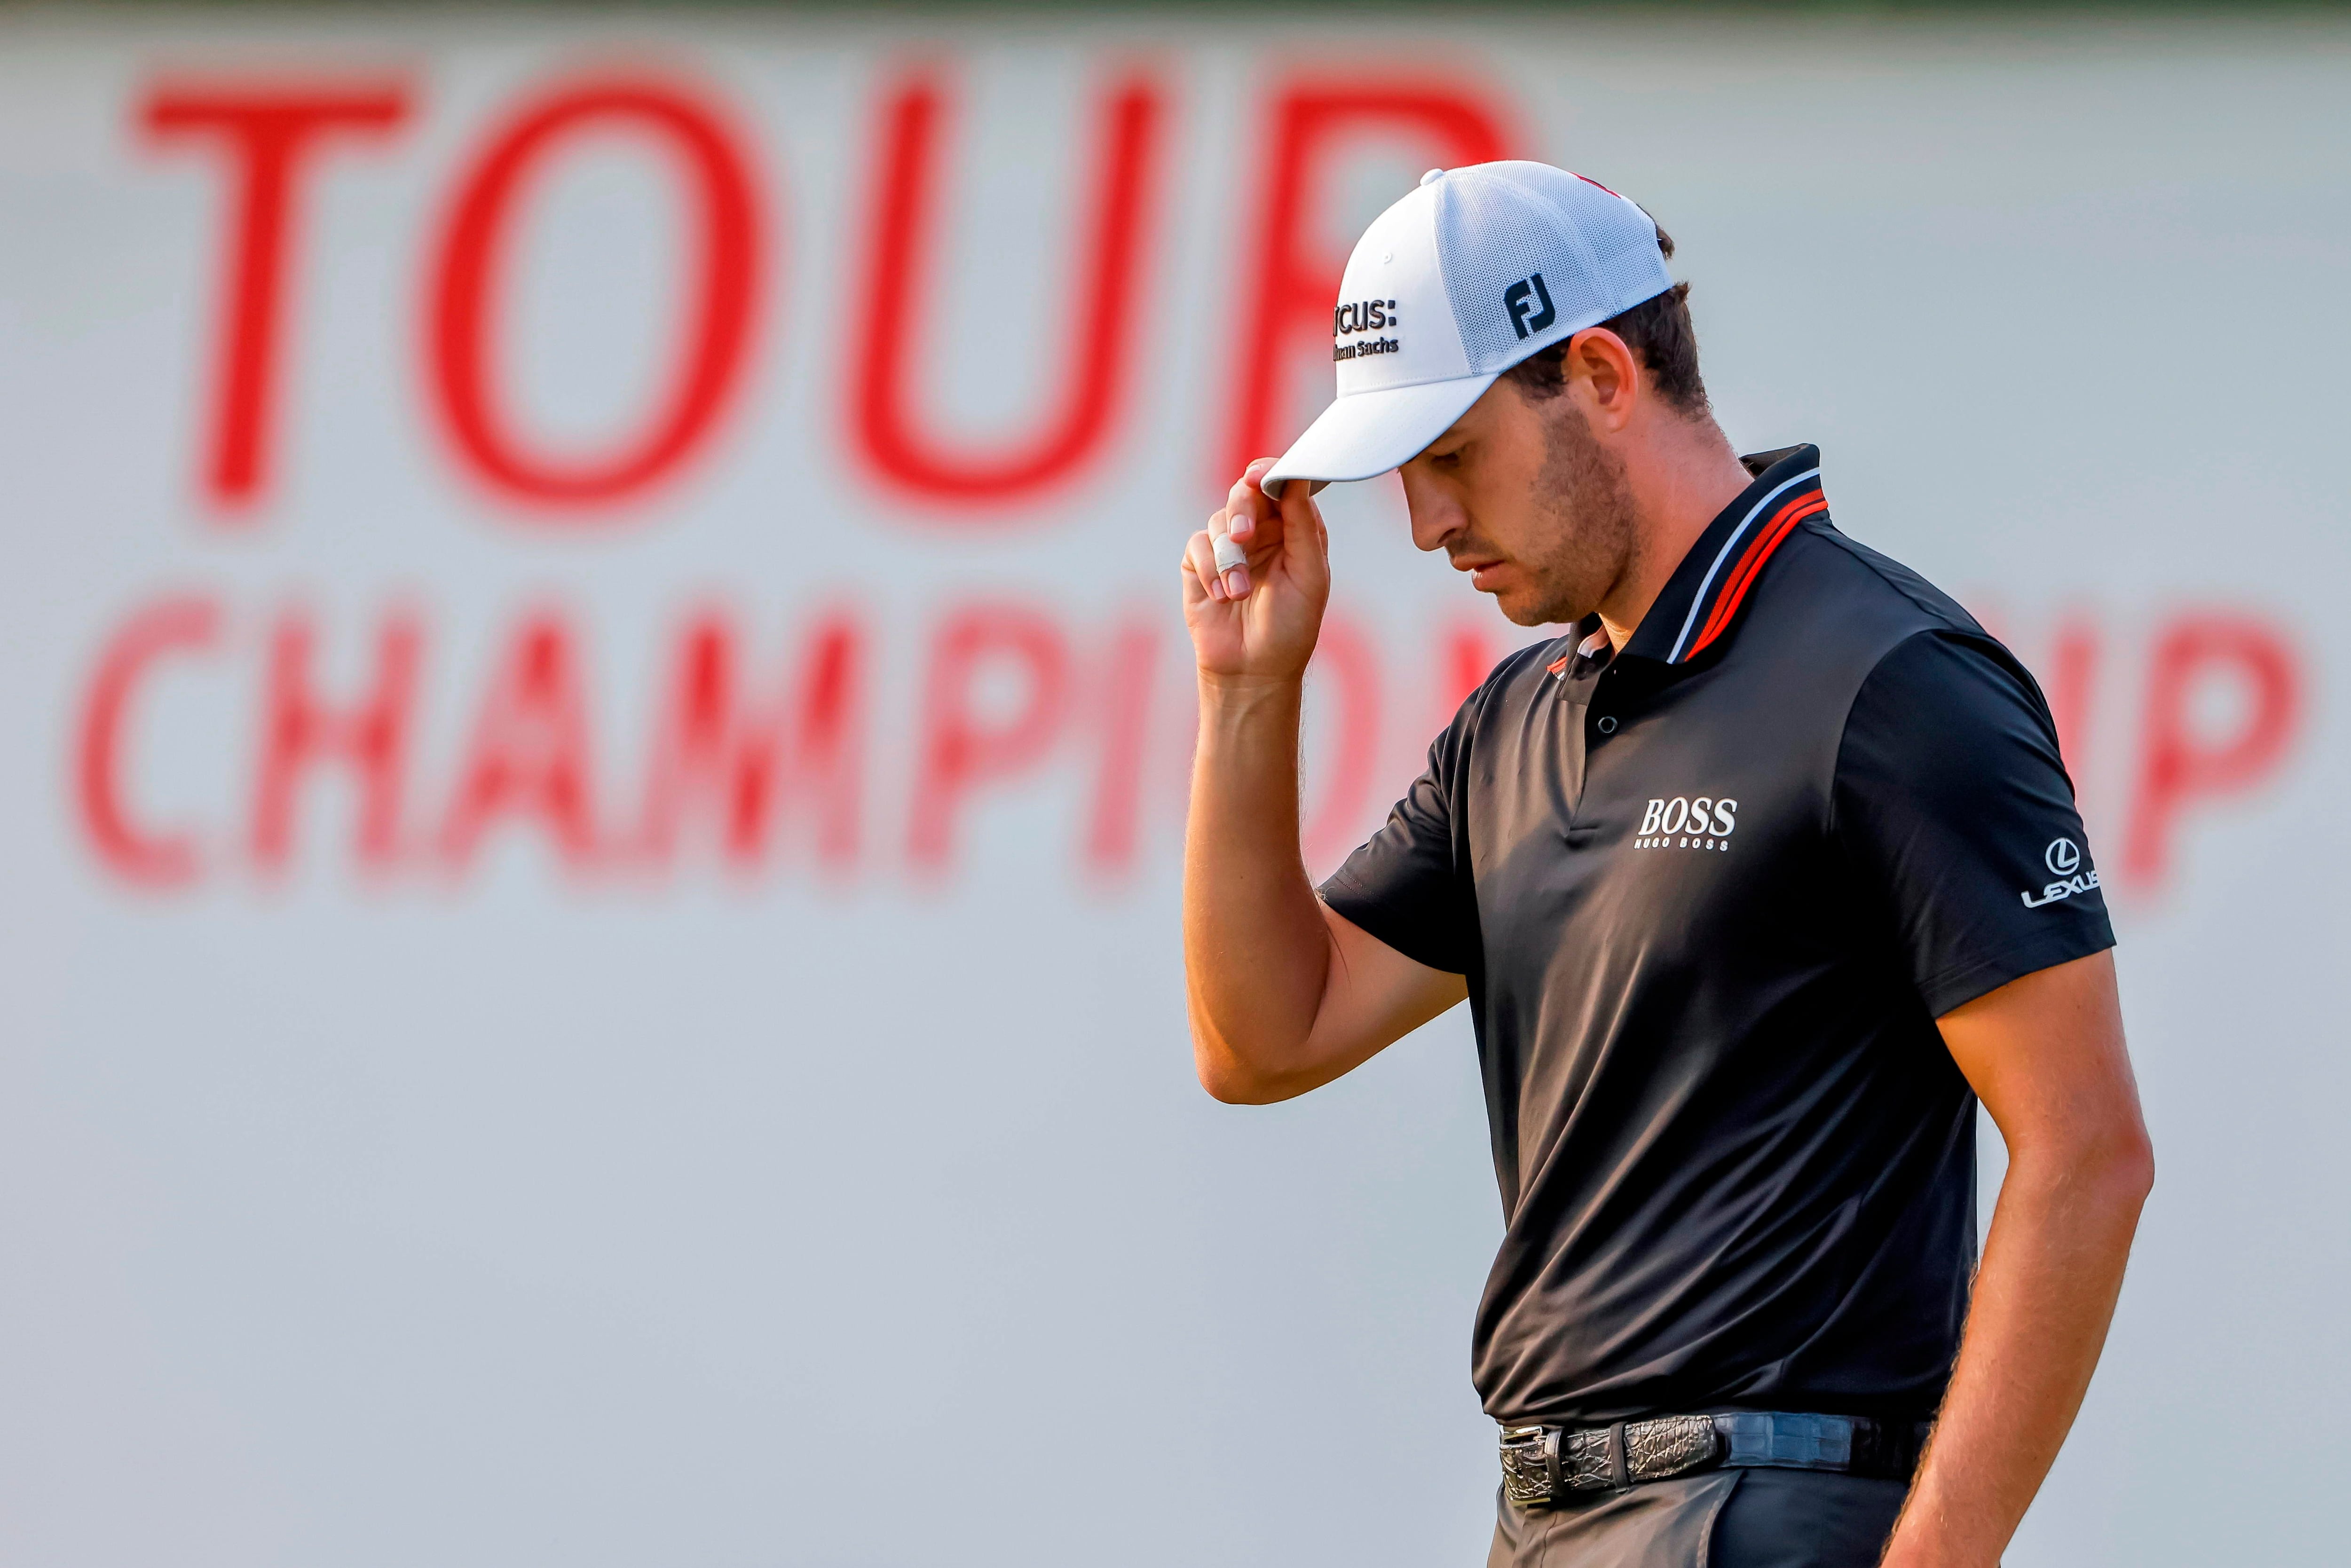 Atlanta (United States), 04/09/2021.- Patrick Cantlay of the US reacts after making a birdie putt on the eighteenth hole during the third round of the 2021 TOUR Championship golf tournament at the East Lake Golf Club in Atlanta, Georgia, USA, 04 September 2021. The tournament is the finale of the PGA Tour FedExCup playoffs. (Estados Unidos) EFE/EPA/ERIK S. LESSER 